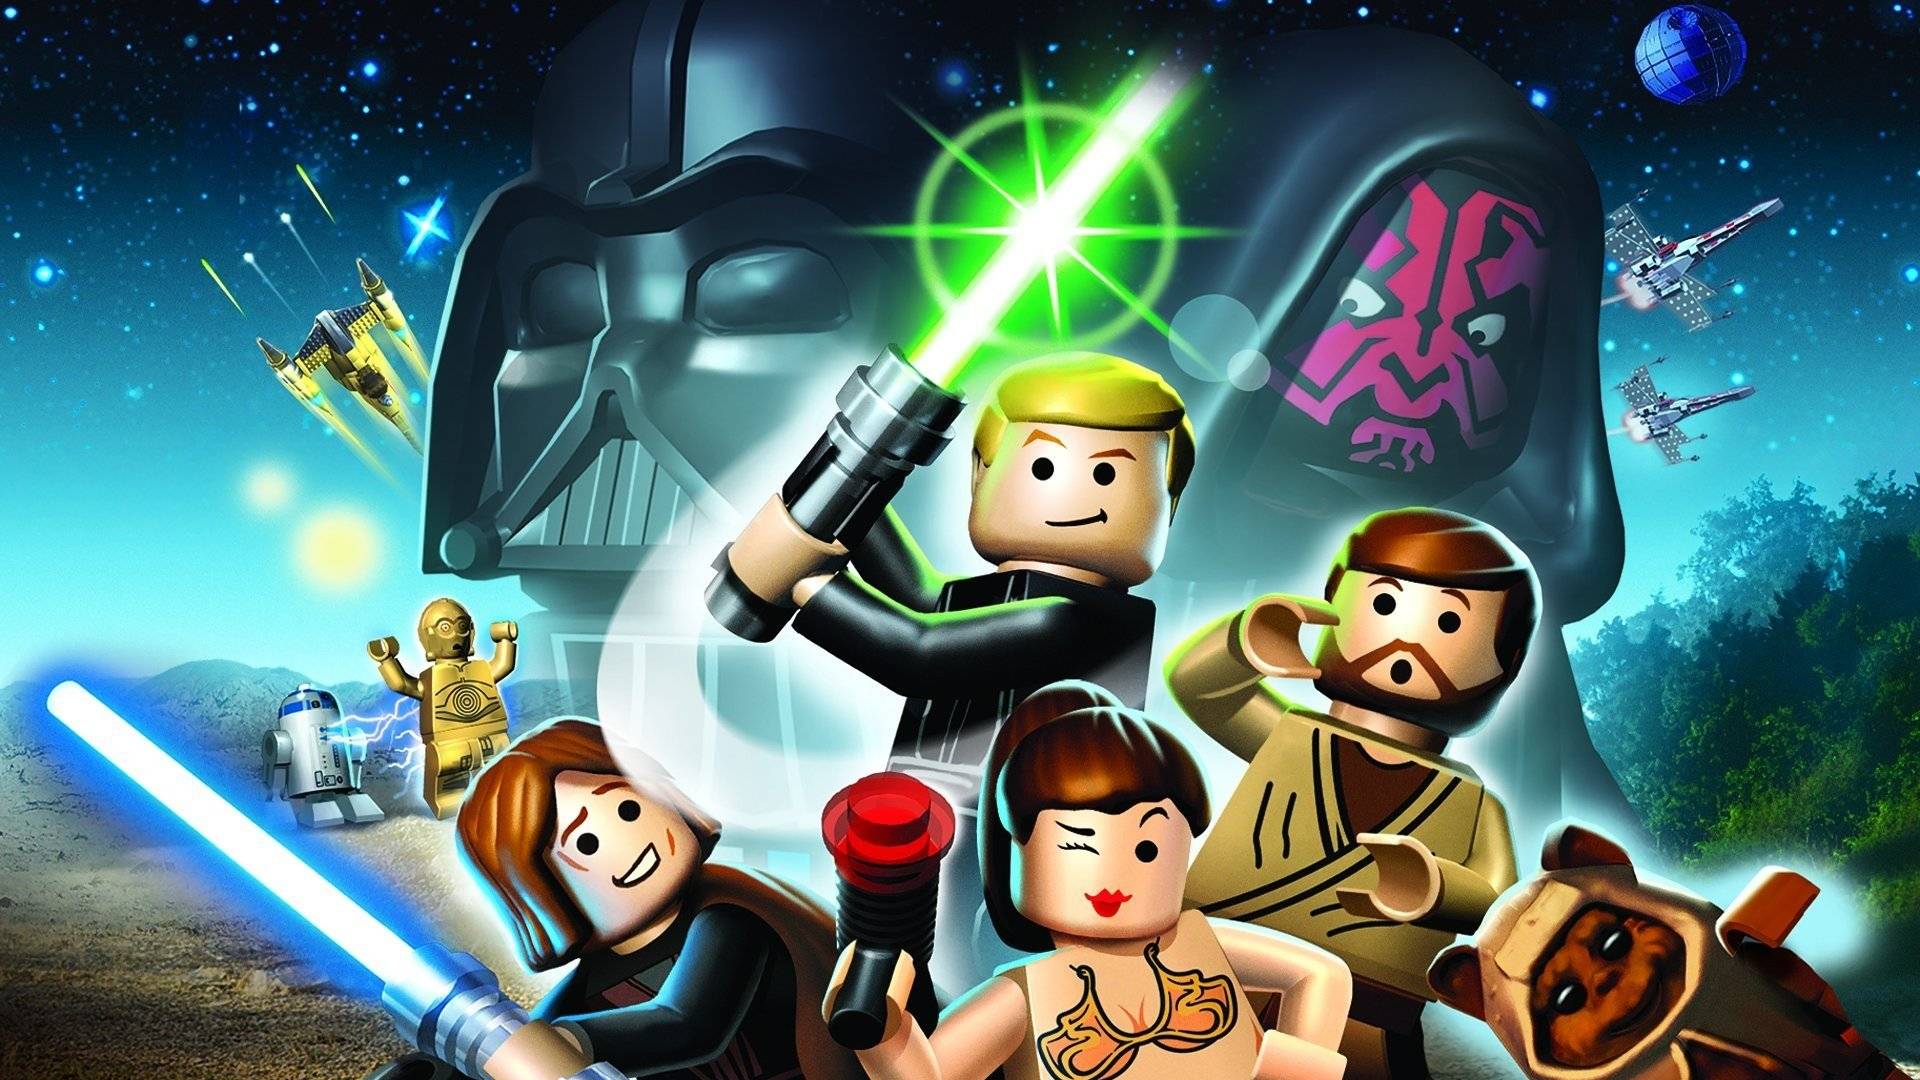 Lego Star Wars The Complete Saga Ability and Power Brick Unlock Codes